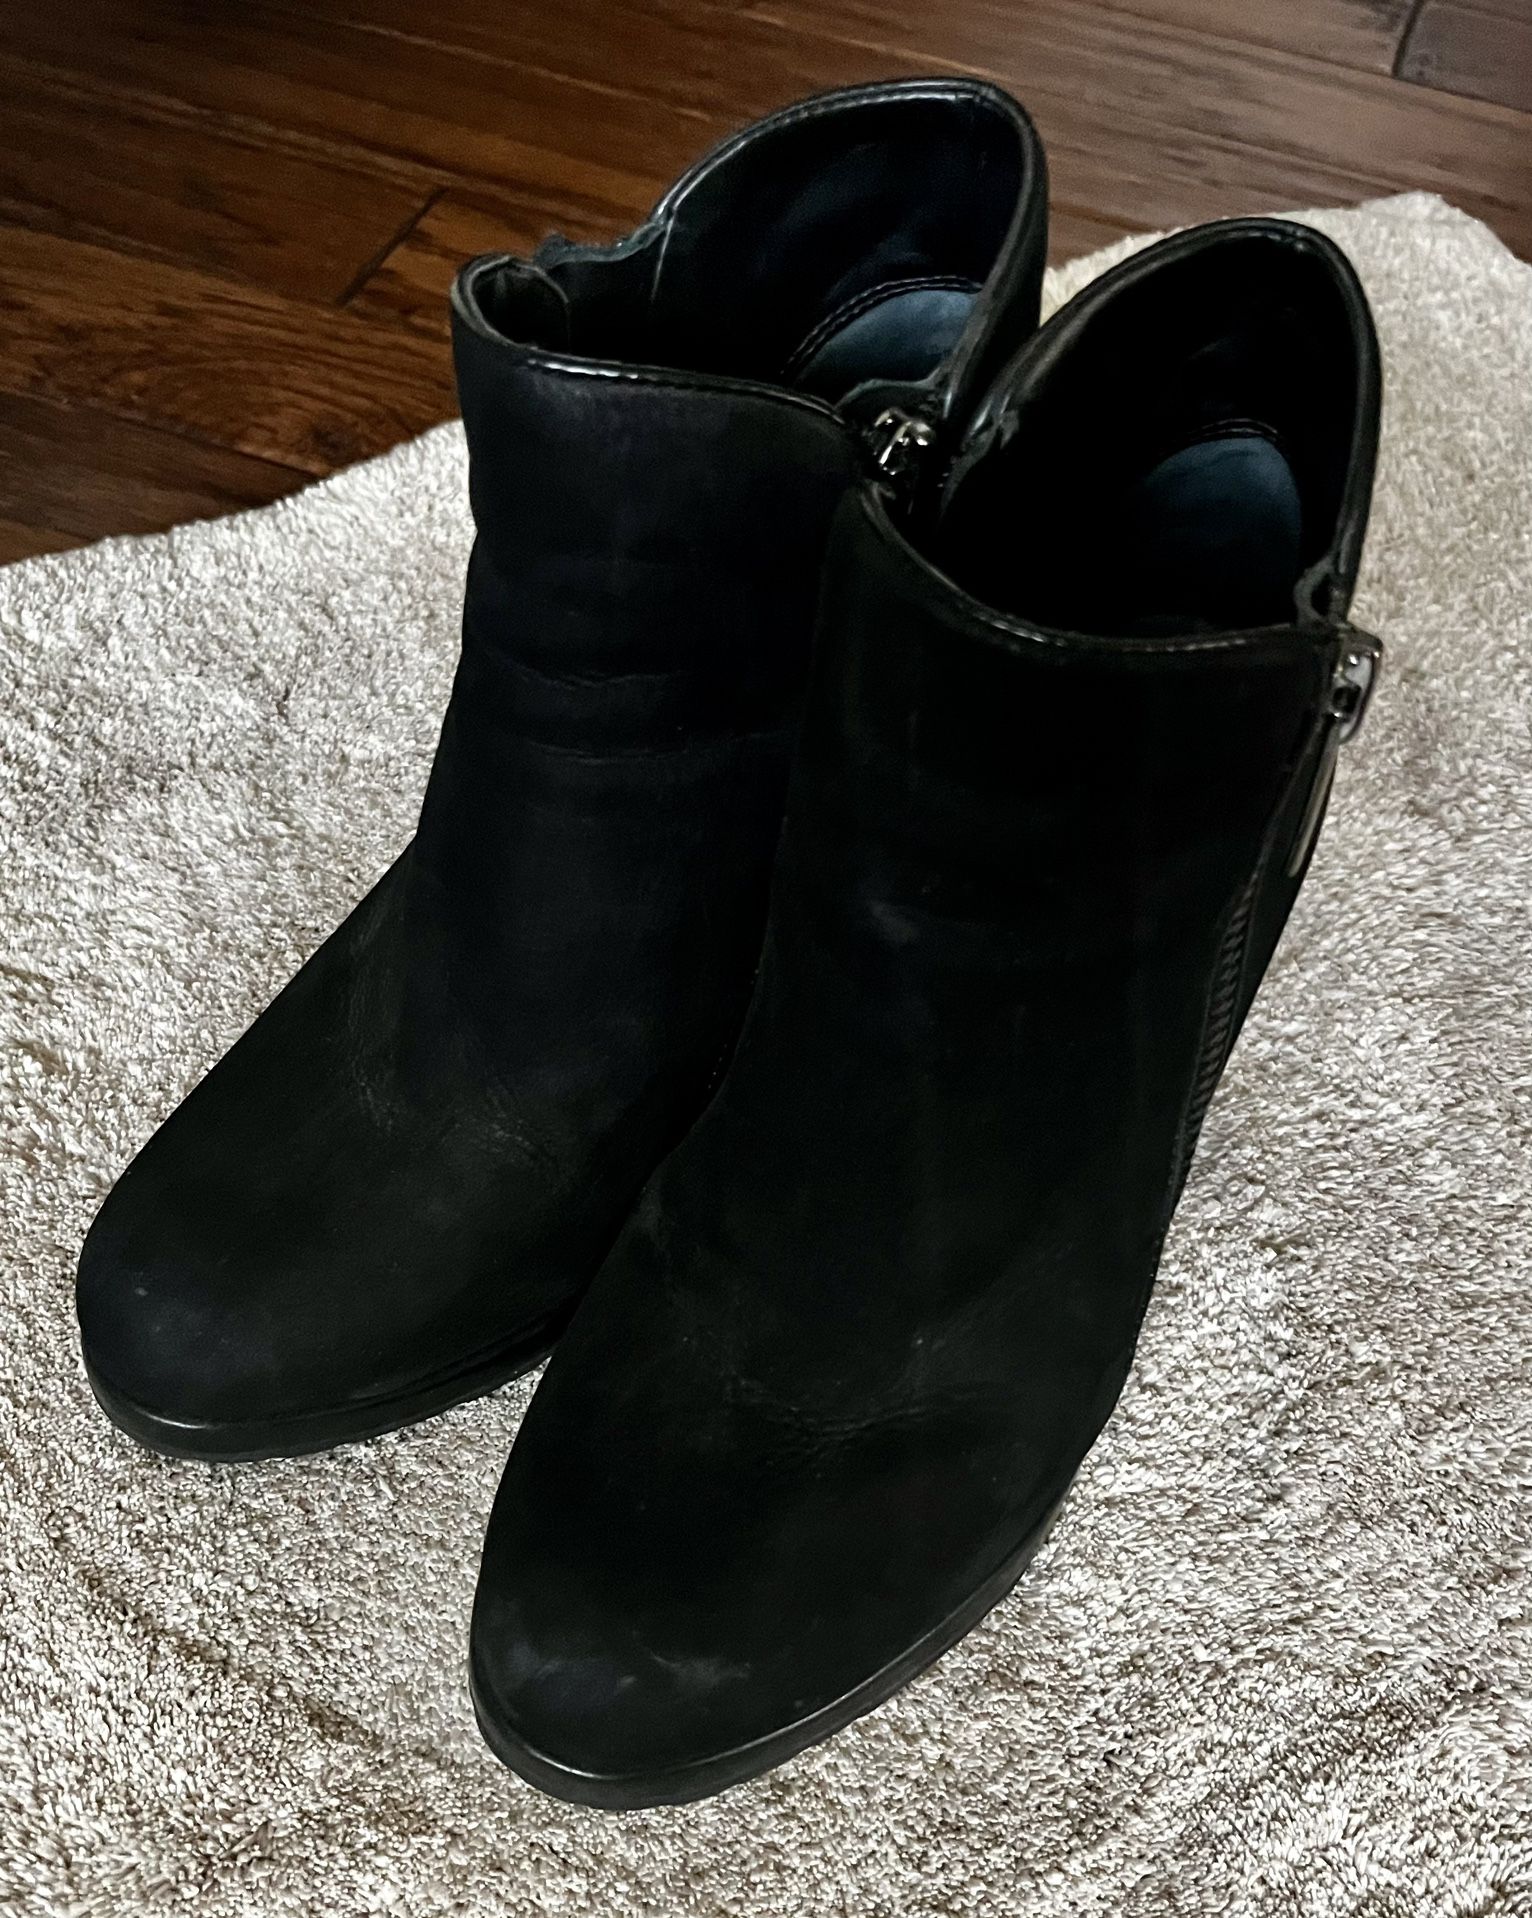 Black Ankle Boots Women’s 6.5